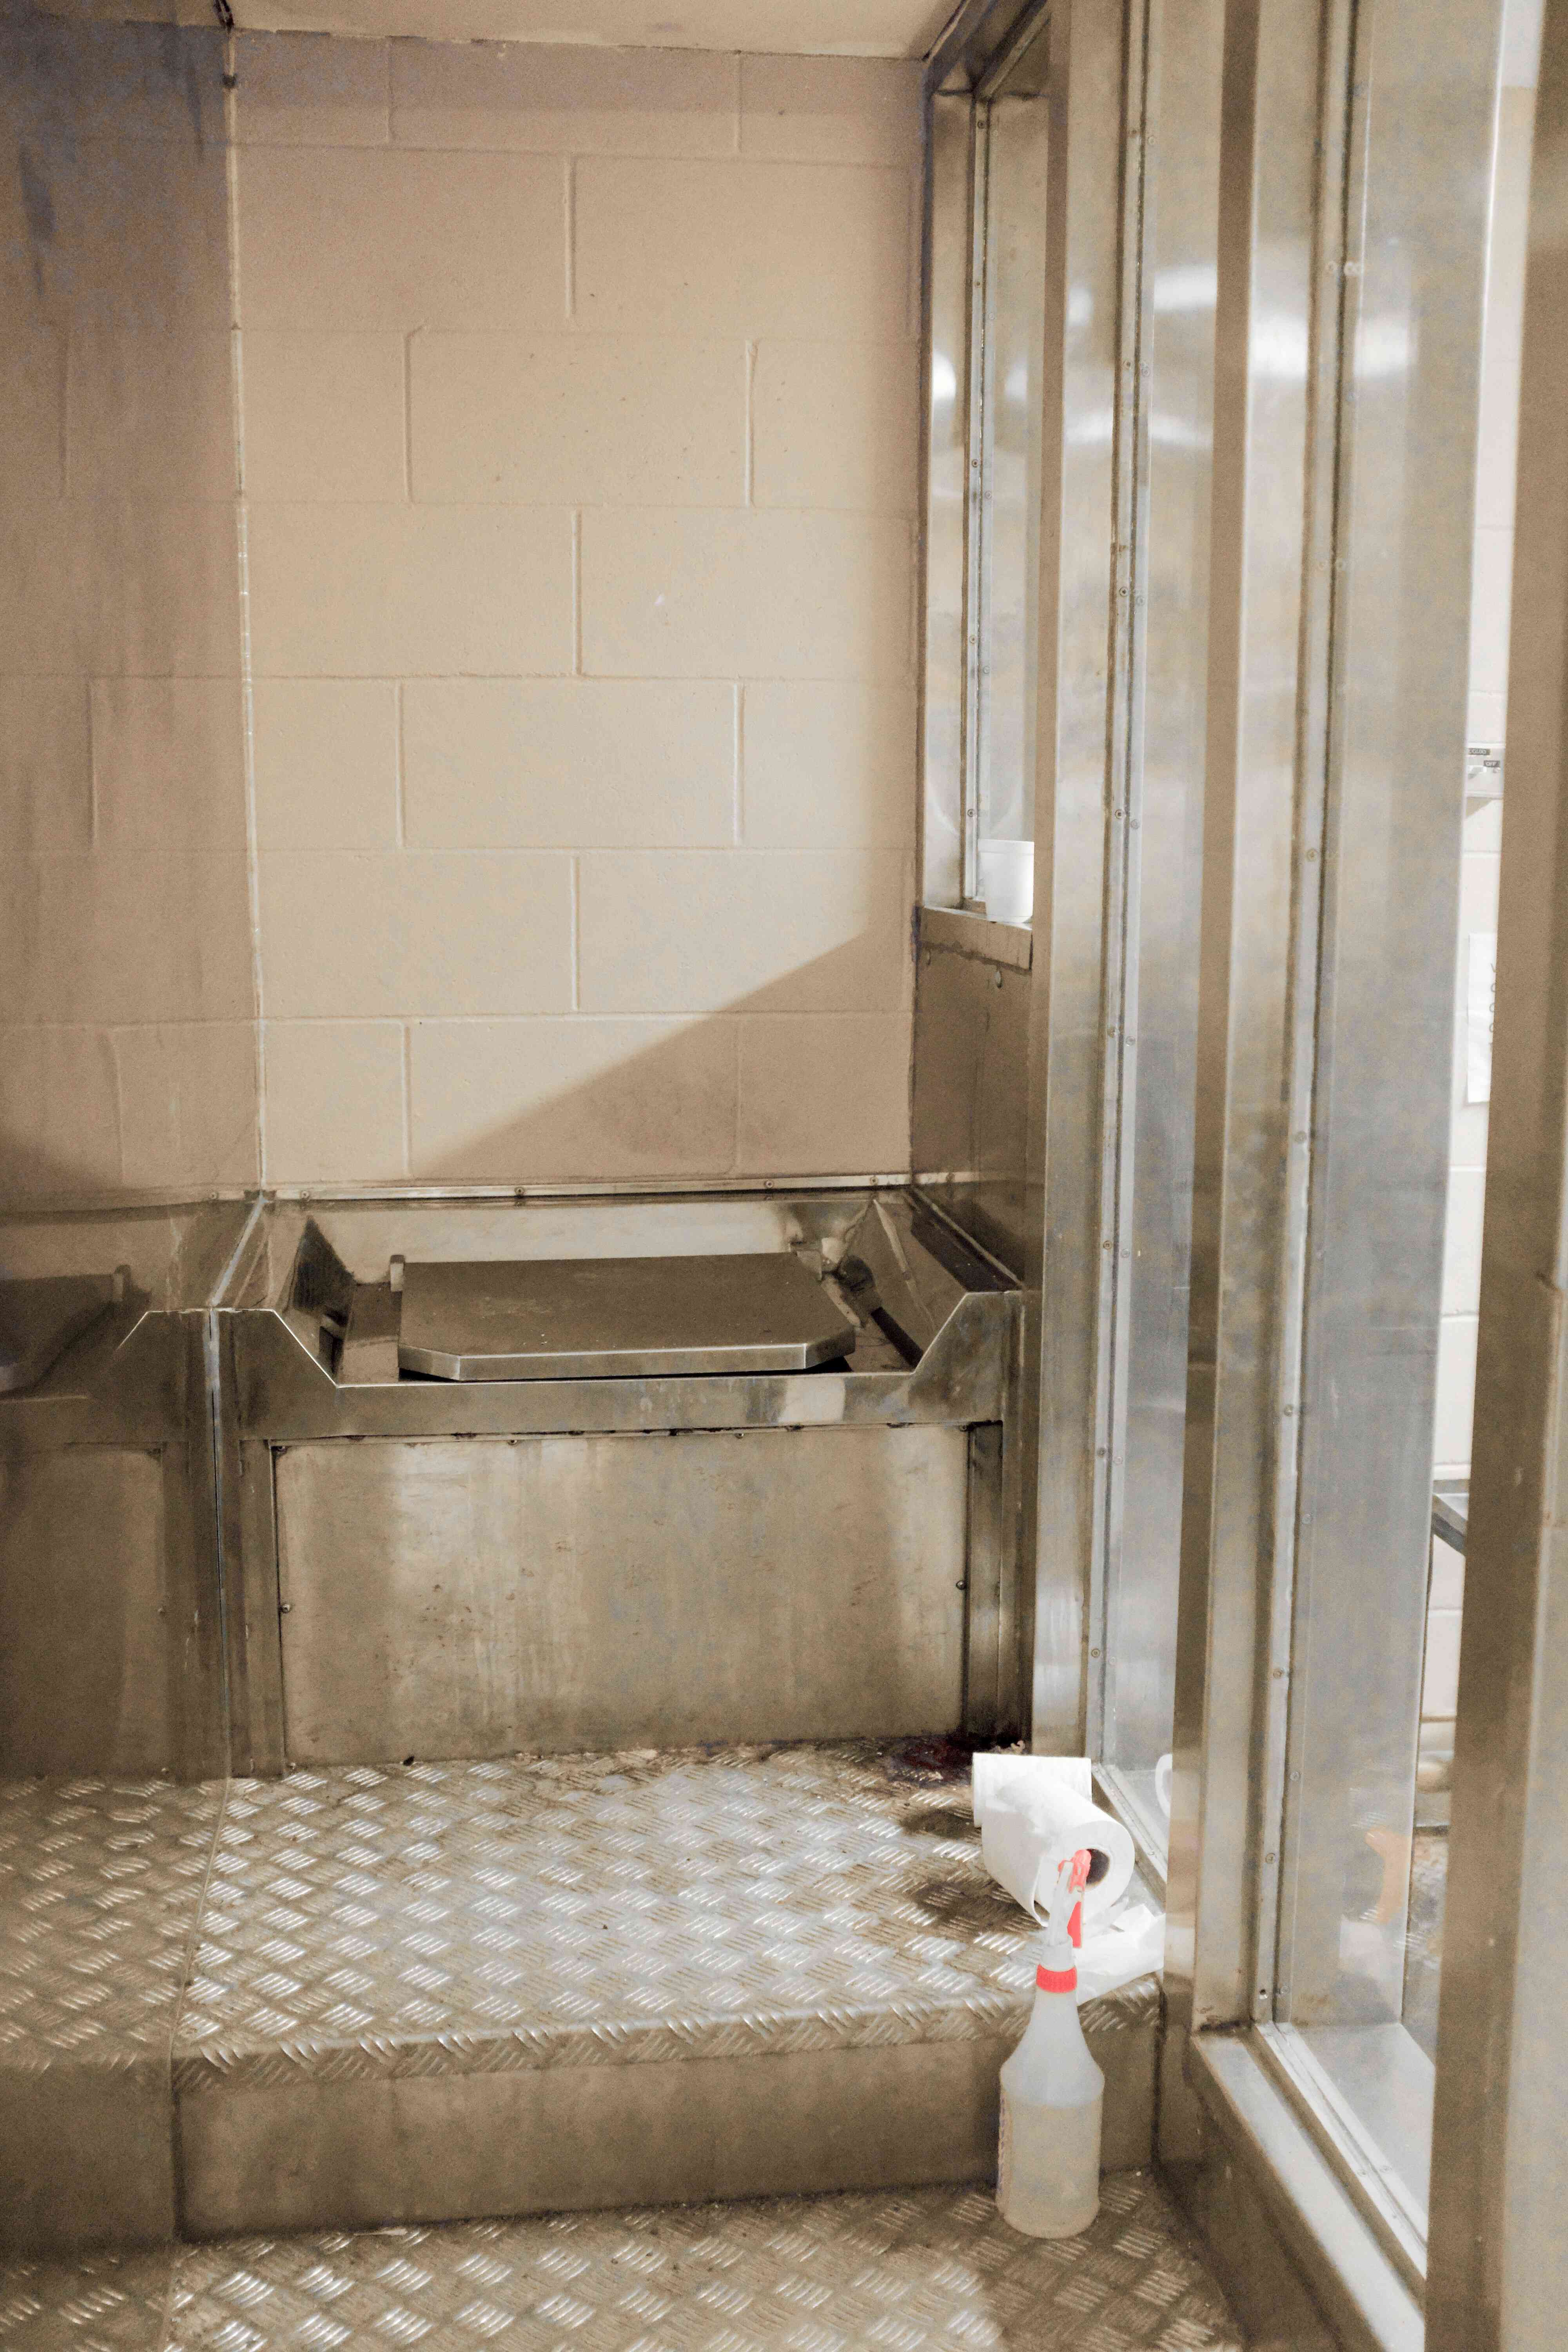 Photo of a toilet inside a dry cell at Drummond Institution.